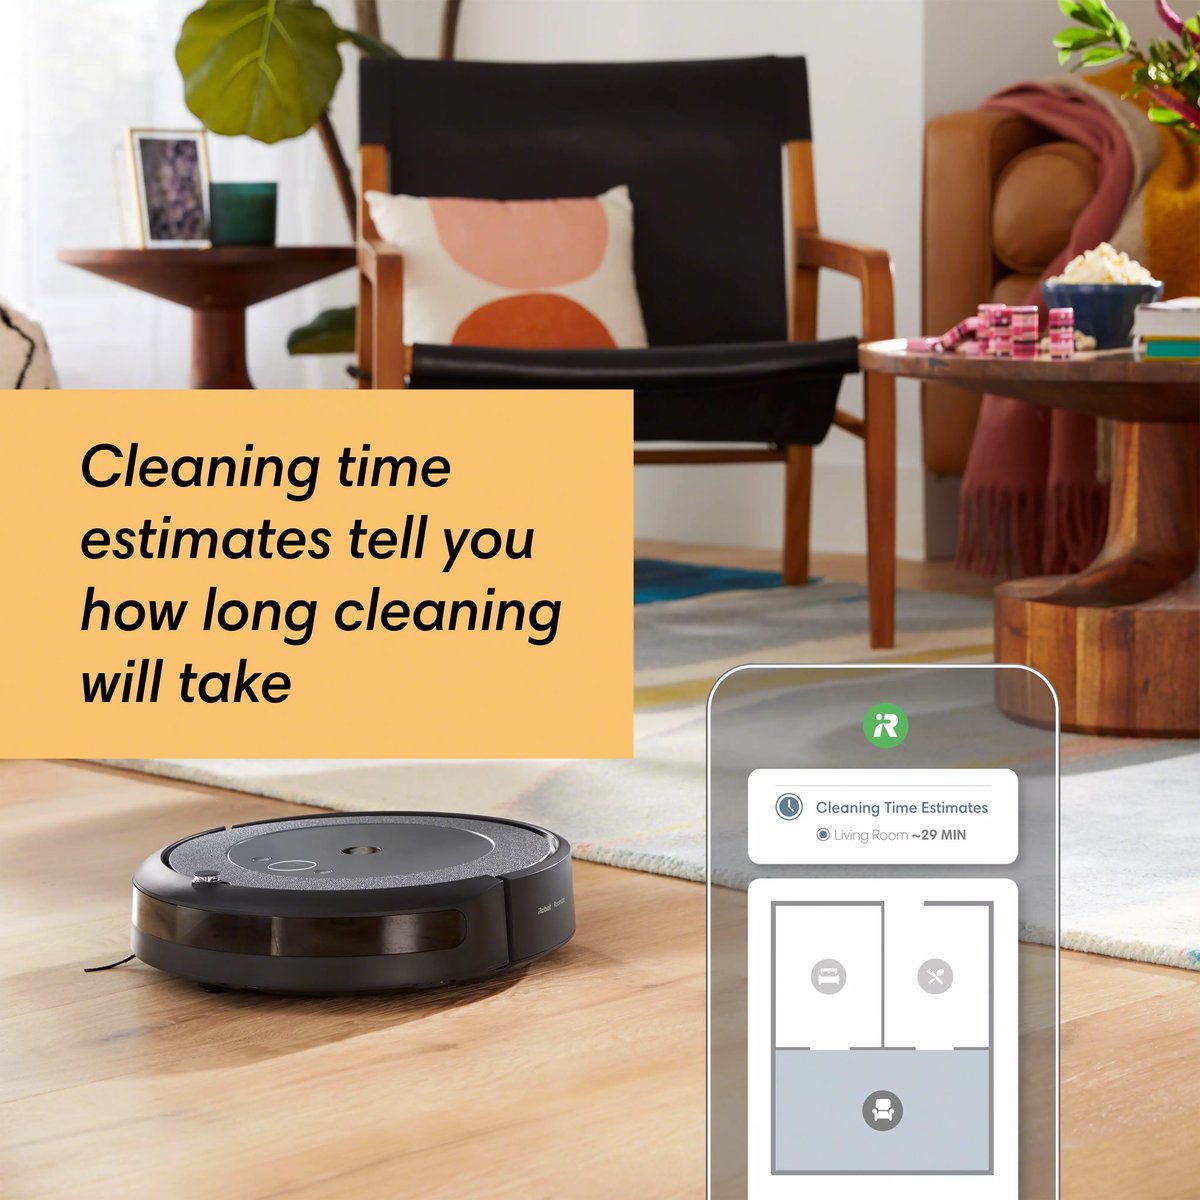 Ever curious how long your #Roomba will be cleaning? With cleaning time estimates, guess no more.